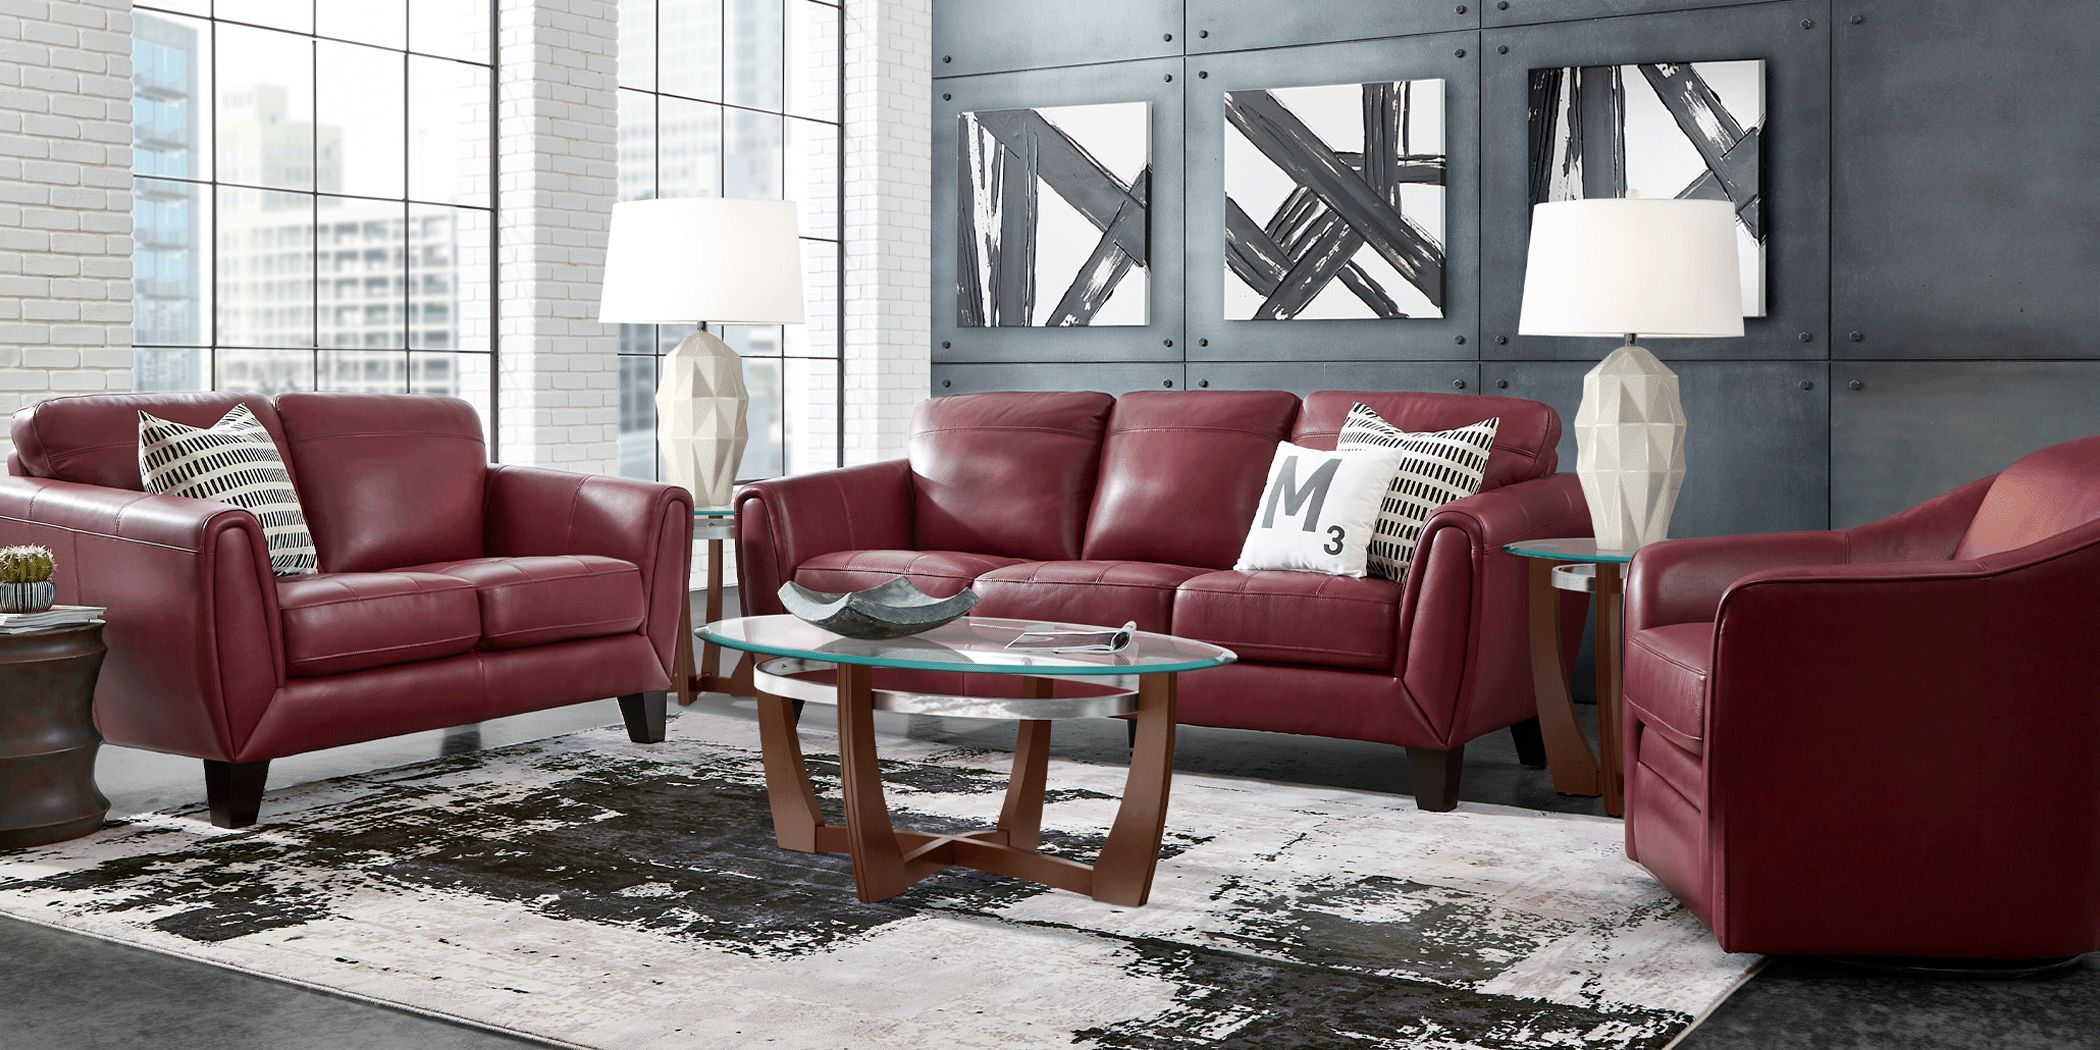 Livorno Lane Red Leather 3 Pc Living, Red Leather Couch Living Room